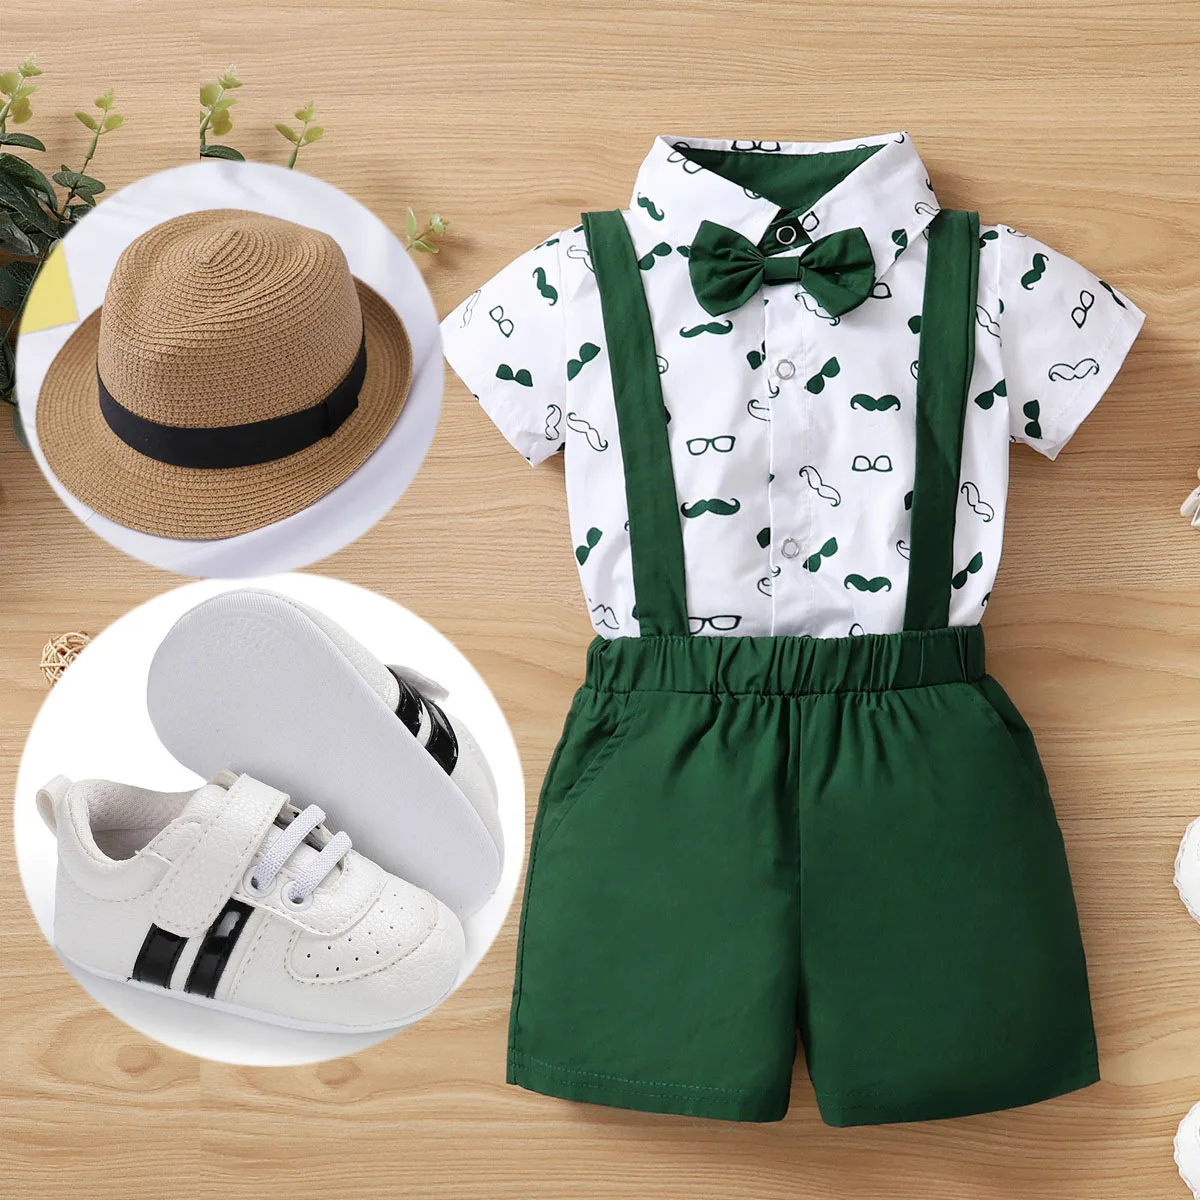 Baby Boy Clothes My First Birthday Outfit Gentleman Wedding Bow Tie Suit Bodysuits Cartoon  Romper with Suspender Shorts